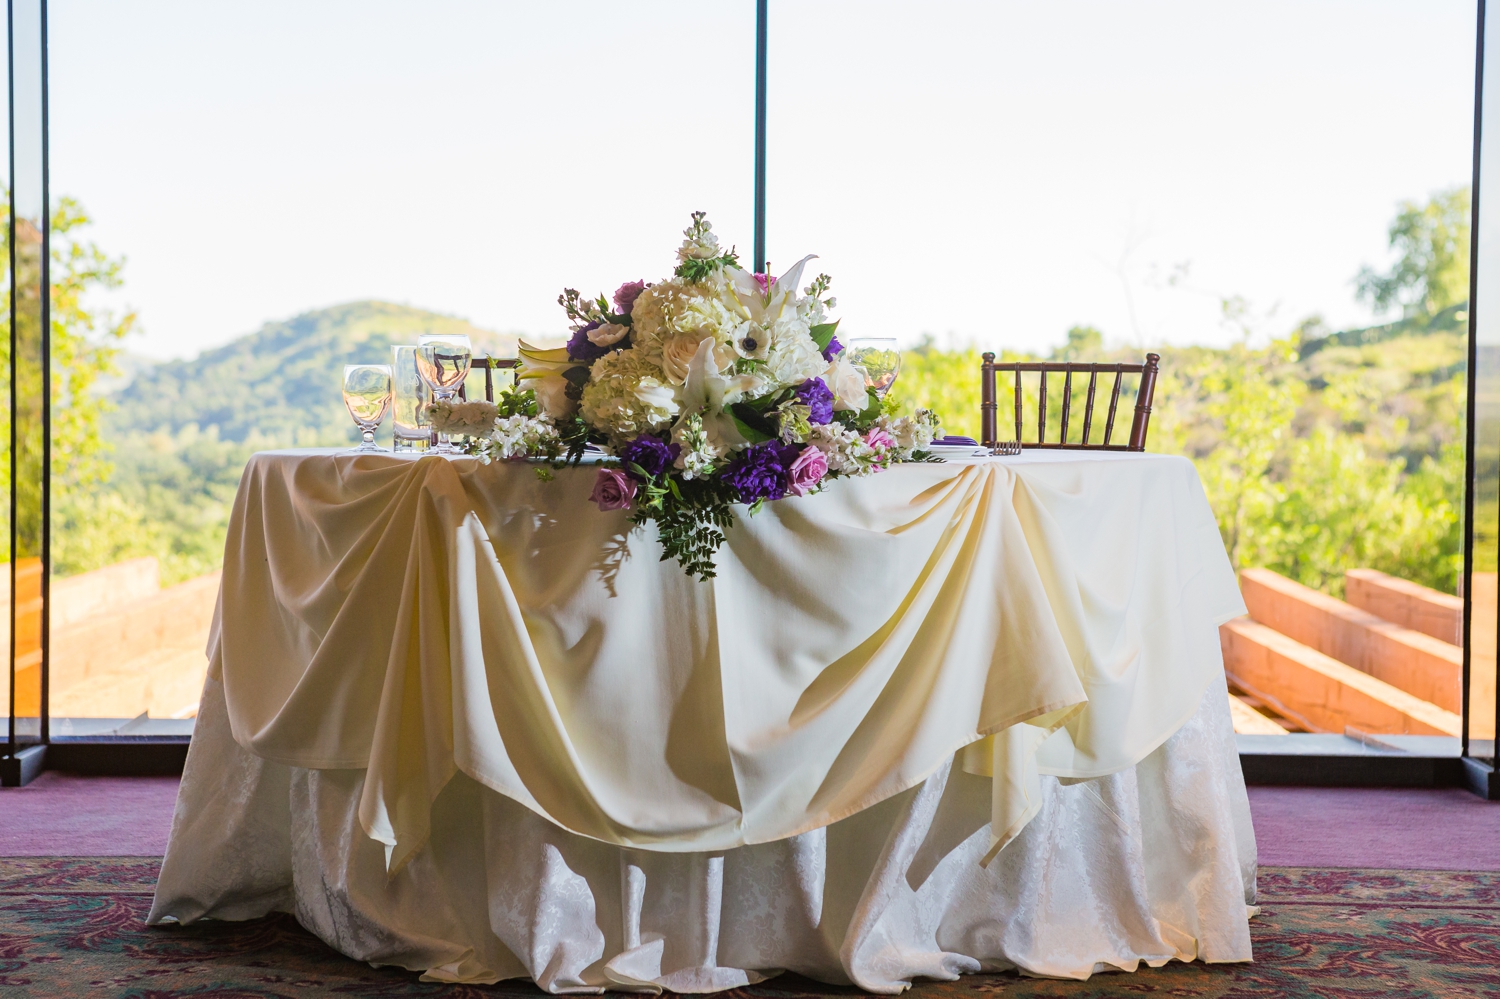 White and ivory sweetheart table with white and purple flowers at Dove Canyon Golf Club wedding reception